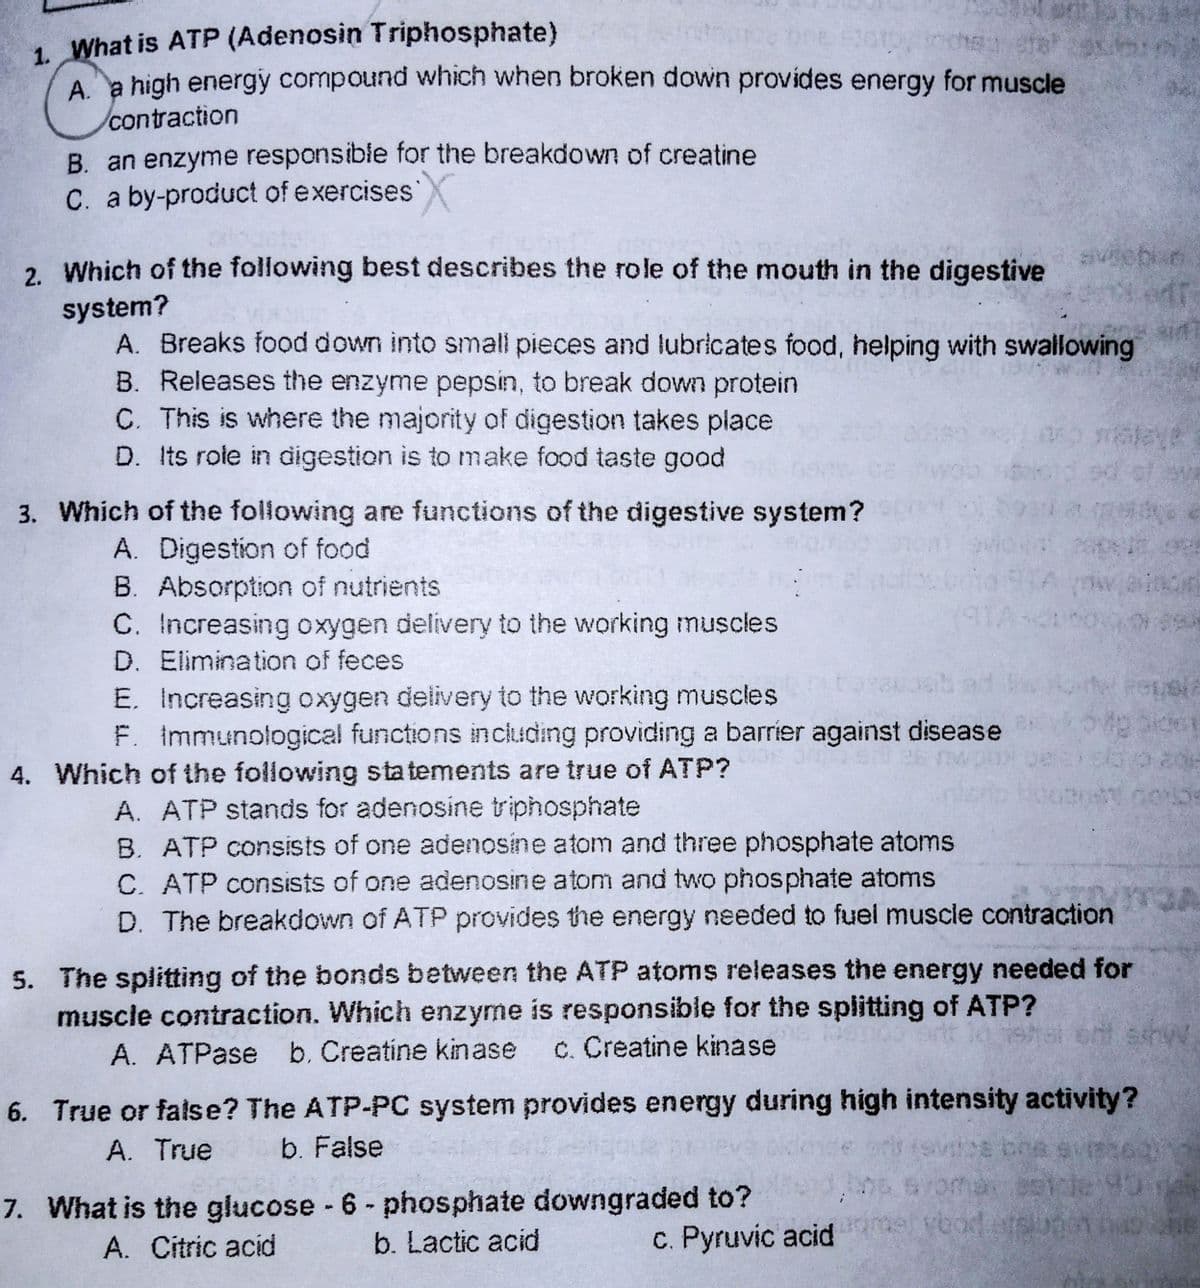 1. What is ATP (Adenosin Triphosphate)
Aa high energy compound which when broken down provides energy for muscle
contraction
B. an enzyme responsible for the breakdown of creatine
C. a by-product of exercises
2. Which of the following best describes the role of the mouth in the digestive
sivebun
system?
A. Breaks food down into small pieces and lubricates food, helping with swallowing
B. Releases the enzyme pepsin, to break down protein
C. This is where the majority of digestion takes place
D. Its rote in digestion is to make food taste good
of
3. Which of the following are functions of the digestive system?
A. Digestion of food
B. Absorption of nutrients
C. Increasing oxygen delivery to the working muscles
D. Elimination of feces
E. Increasing oxygen delivery to the working muscles
F. Immunological functions including providing a barrier against disease
4. Which of the following statements are true of ATP?
A. ATP stands for adenosine triphosphate
B. ATP consists of one adenosine atom and three phosphate atoms
C. ATP consists of one adenosine atom and two phosphate atoms
D. The breakdown of ATP provides the energy needed to fuel muscle contraction
5. The splitting of the bonds between the ATP atoms releases the energy needed for
muscle contraction. Which enzyme is responsible for the splitting of ATP?
A. ATPase b. Creatine kinase
c. Creatine kinase
6. True or false? The ATP-PC system provides energy during high intensity activity?
A. True
b. False
7. What is the glucose - 6 - phosphate downgraded to?
b. Lactic acid
A. Citric acid
c. Pyruvic acid
